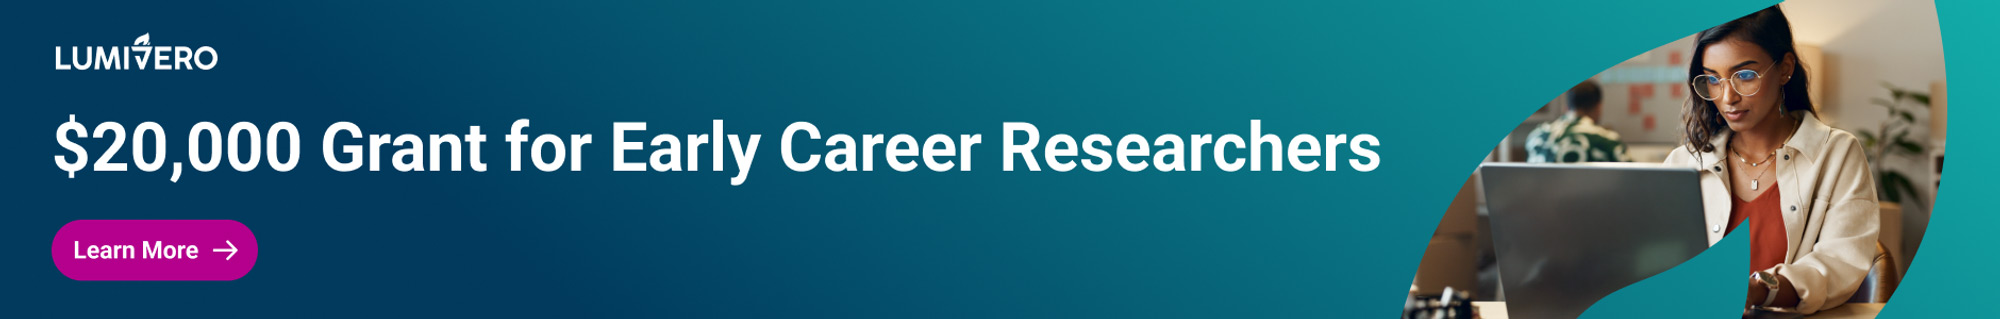 20k grant for early career researchers banner